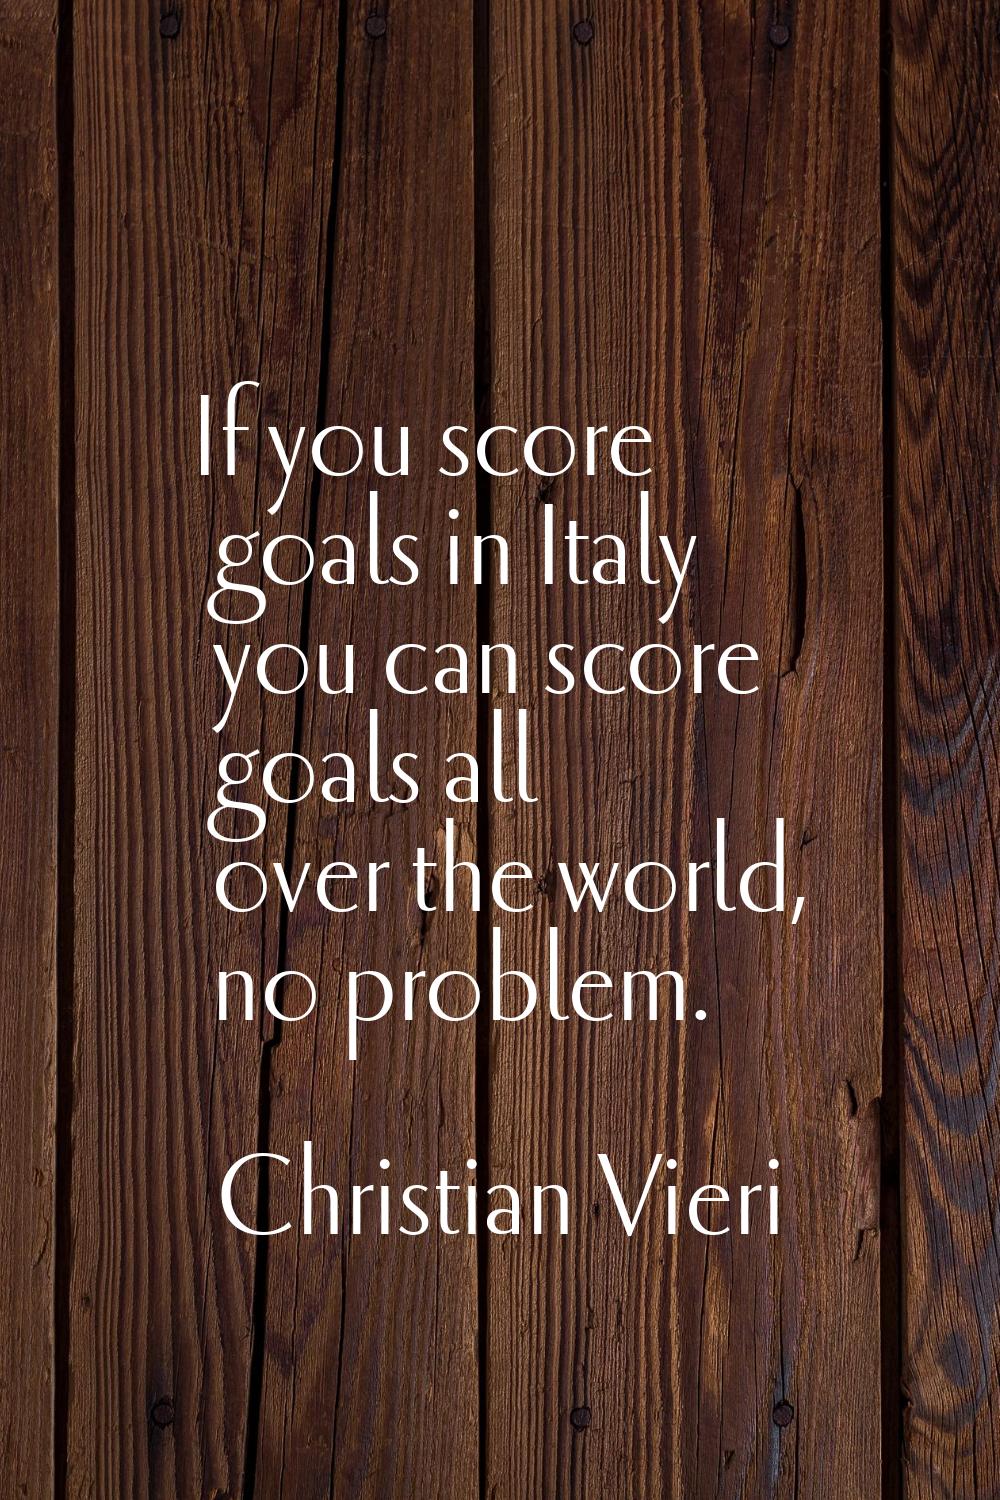 If you score goals in Italy you can score goals all over the world, no problem.